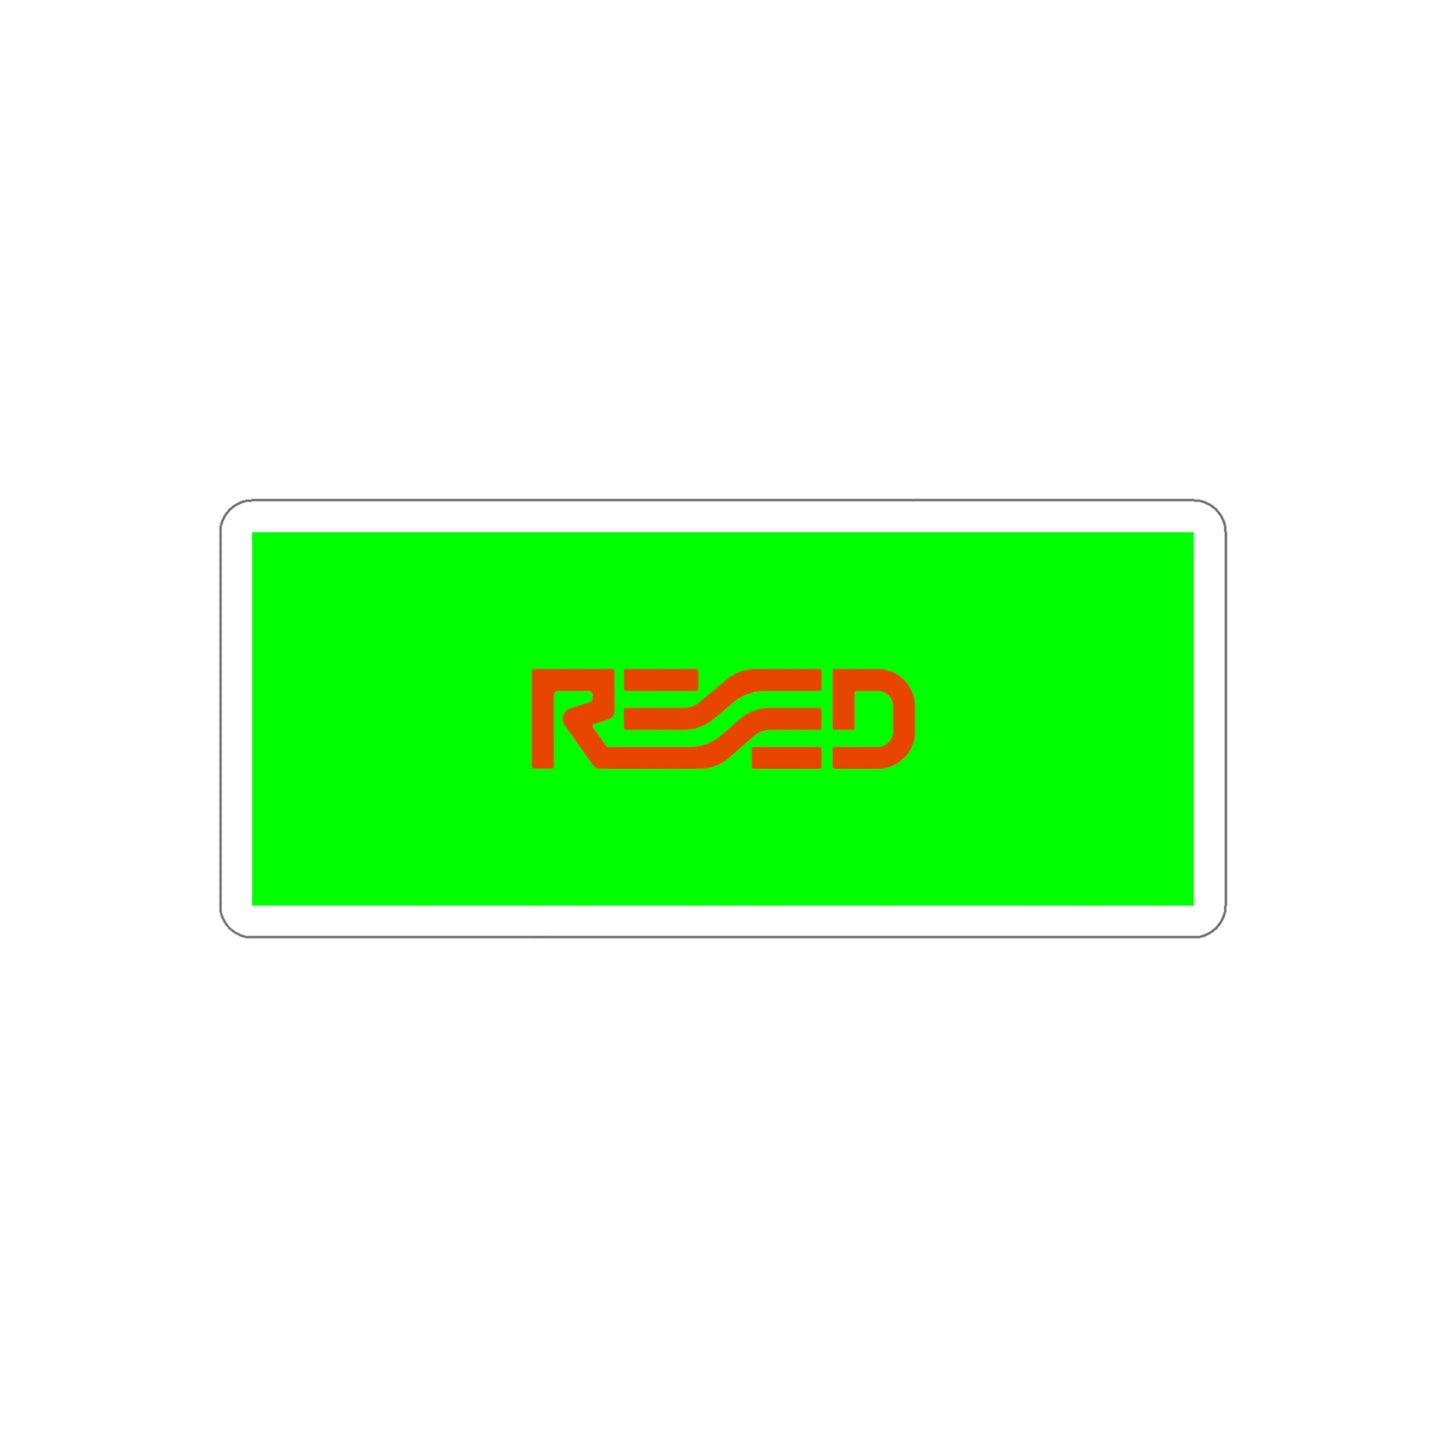 REED LOGO GREEN/RED STICKER - Never Stop Chasing